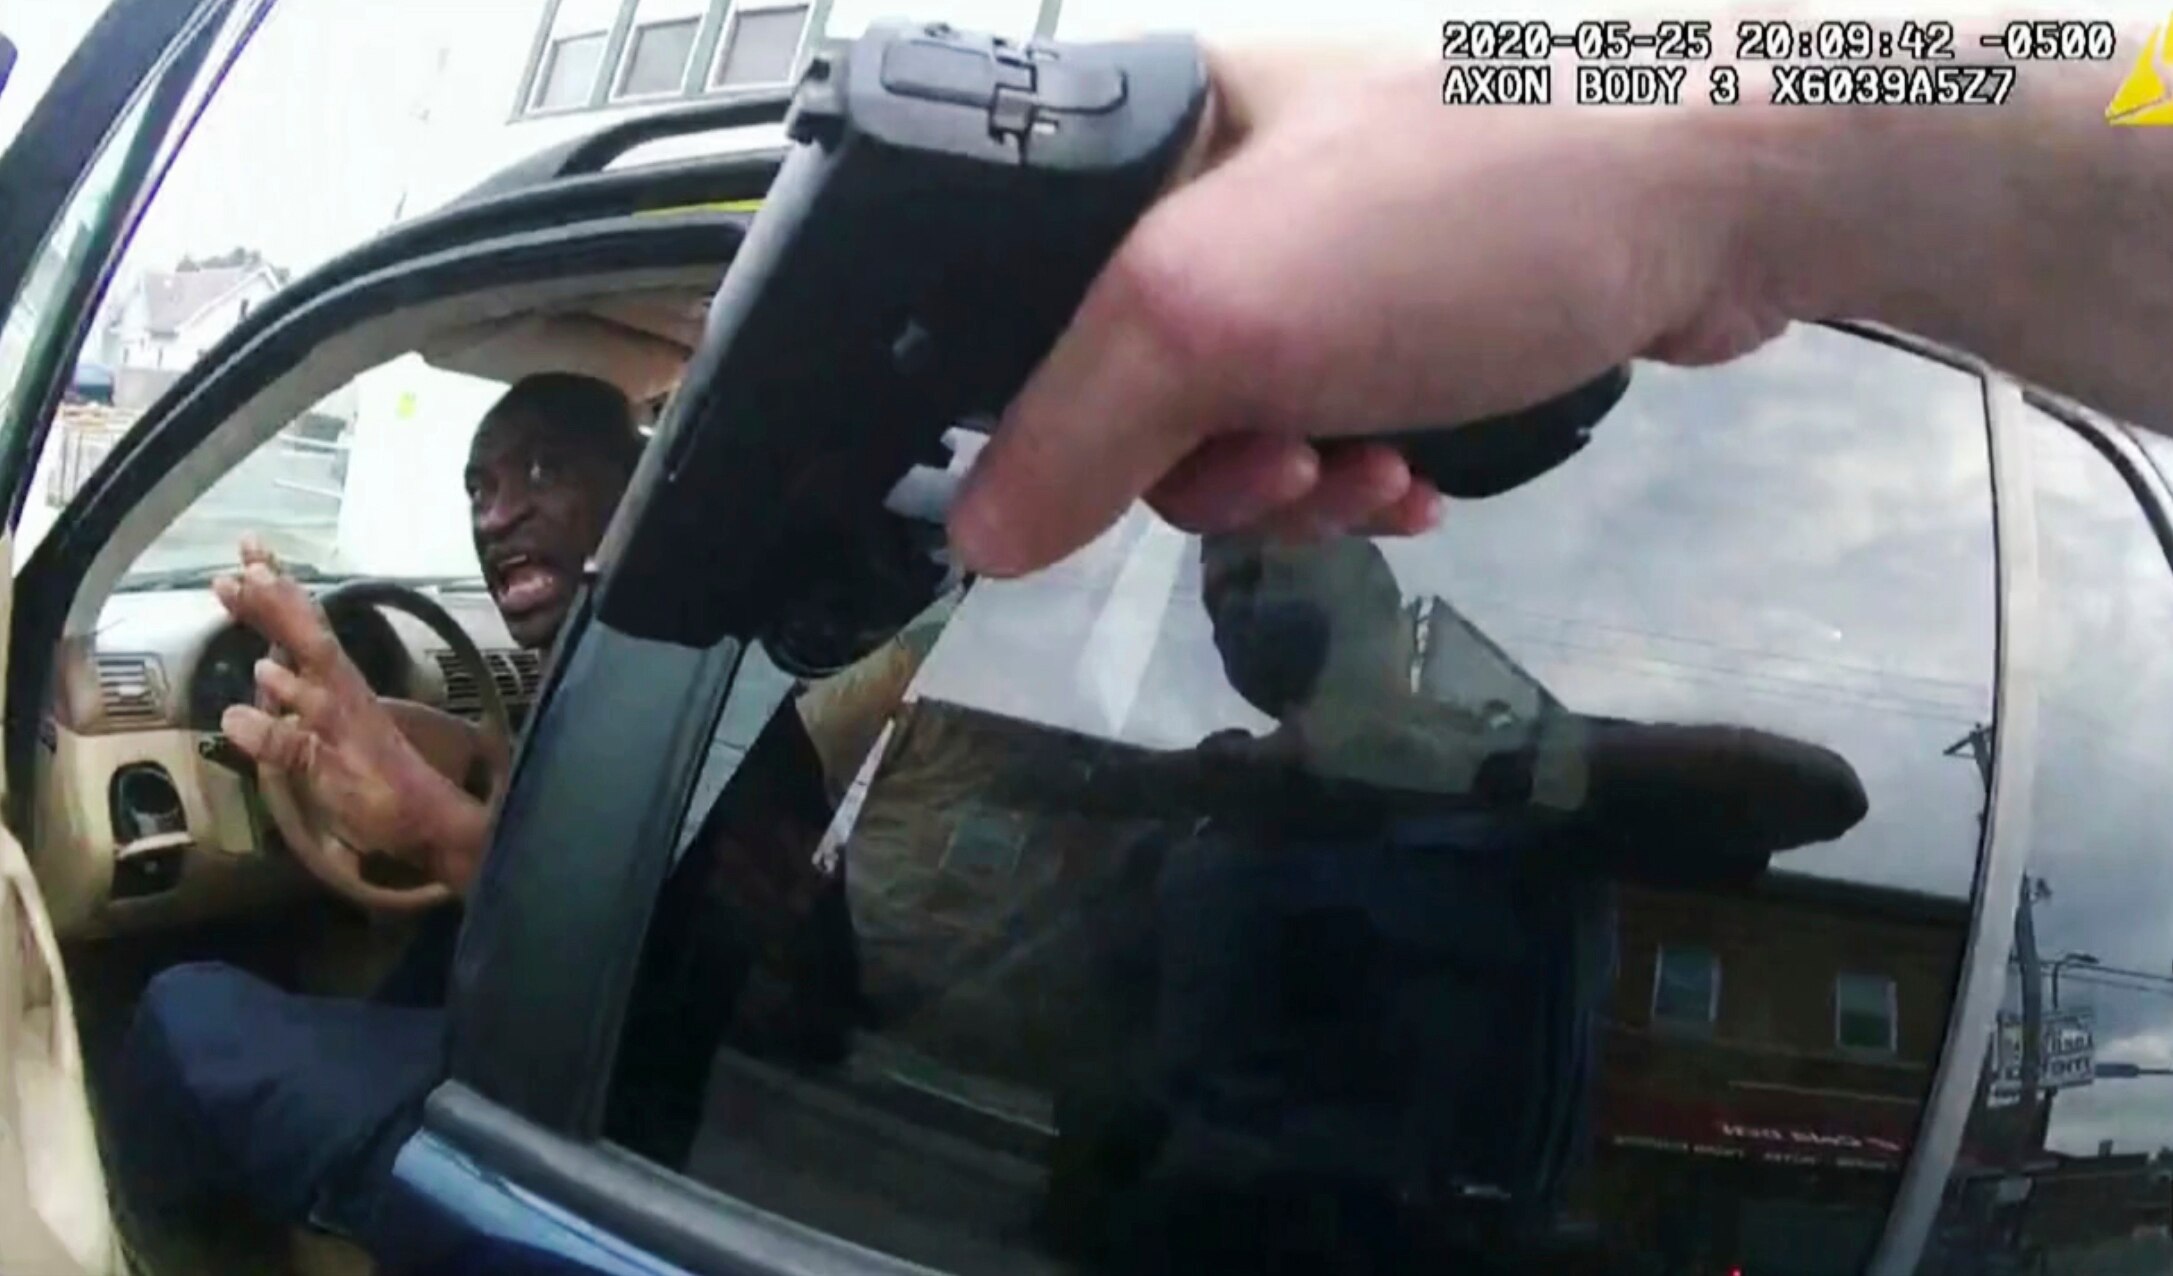 George Floyd reacts as a police officer points a gun at him.